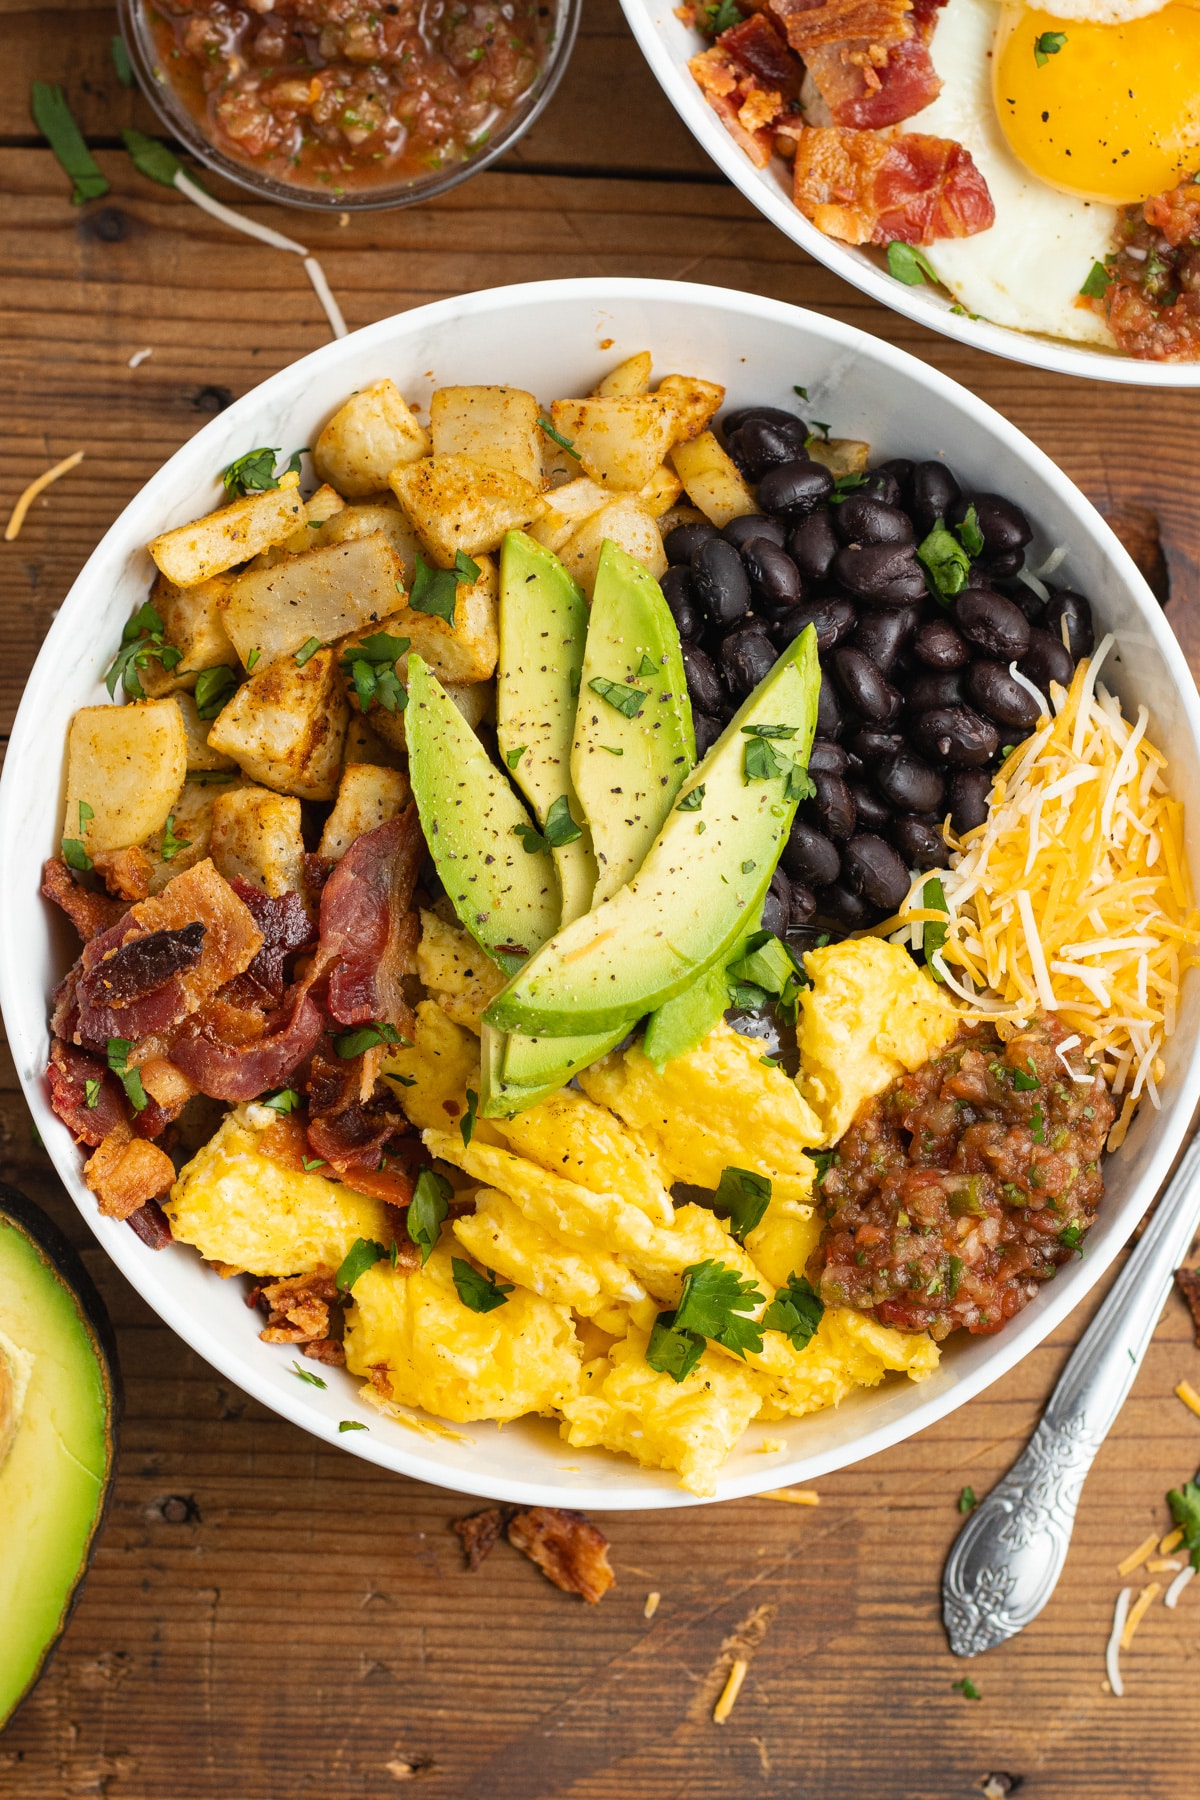 This is a picture of a breakfast burrito bowl with scrambled eggs.